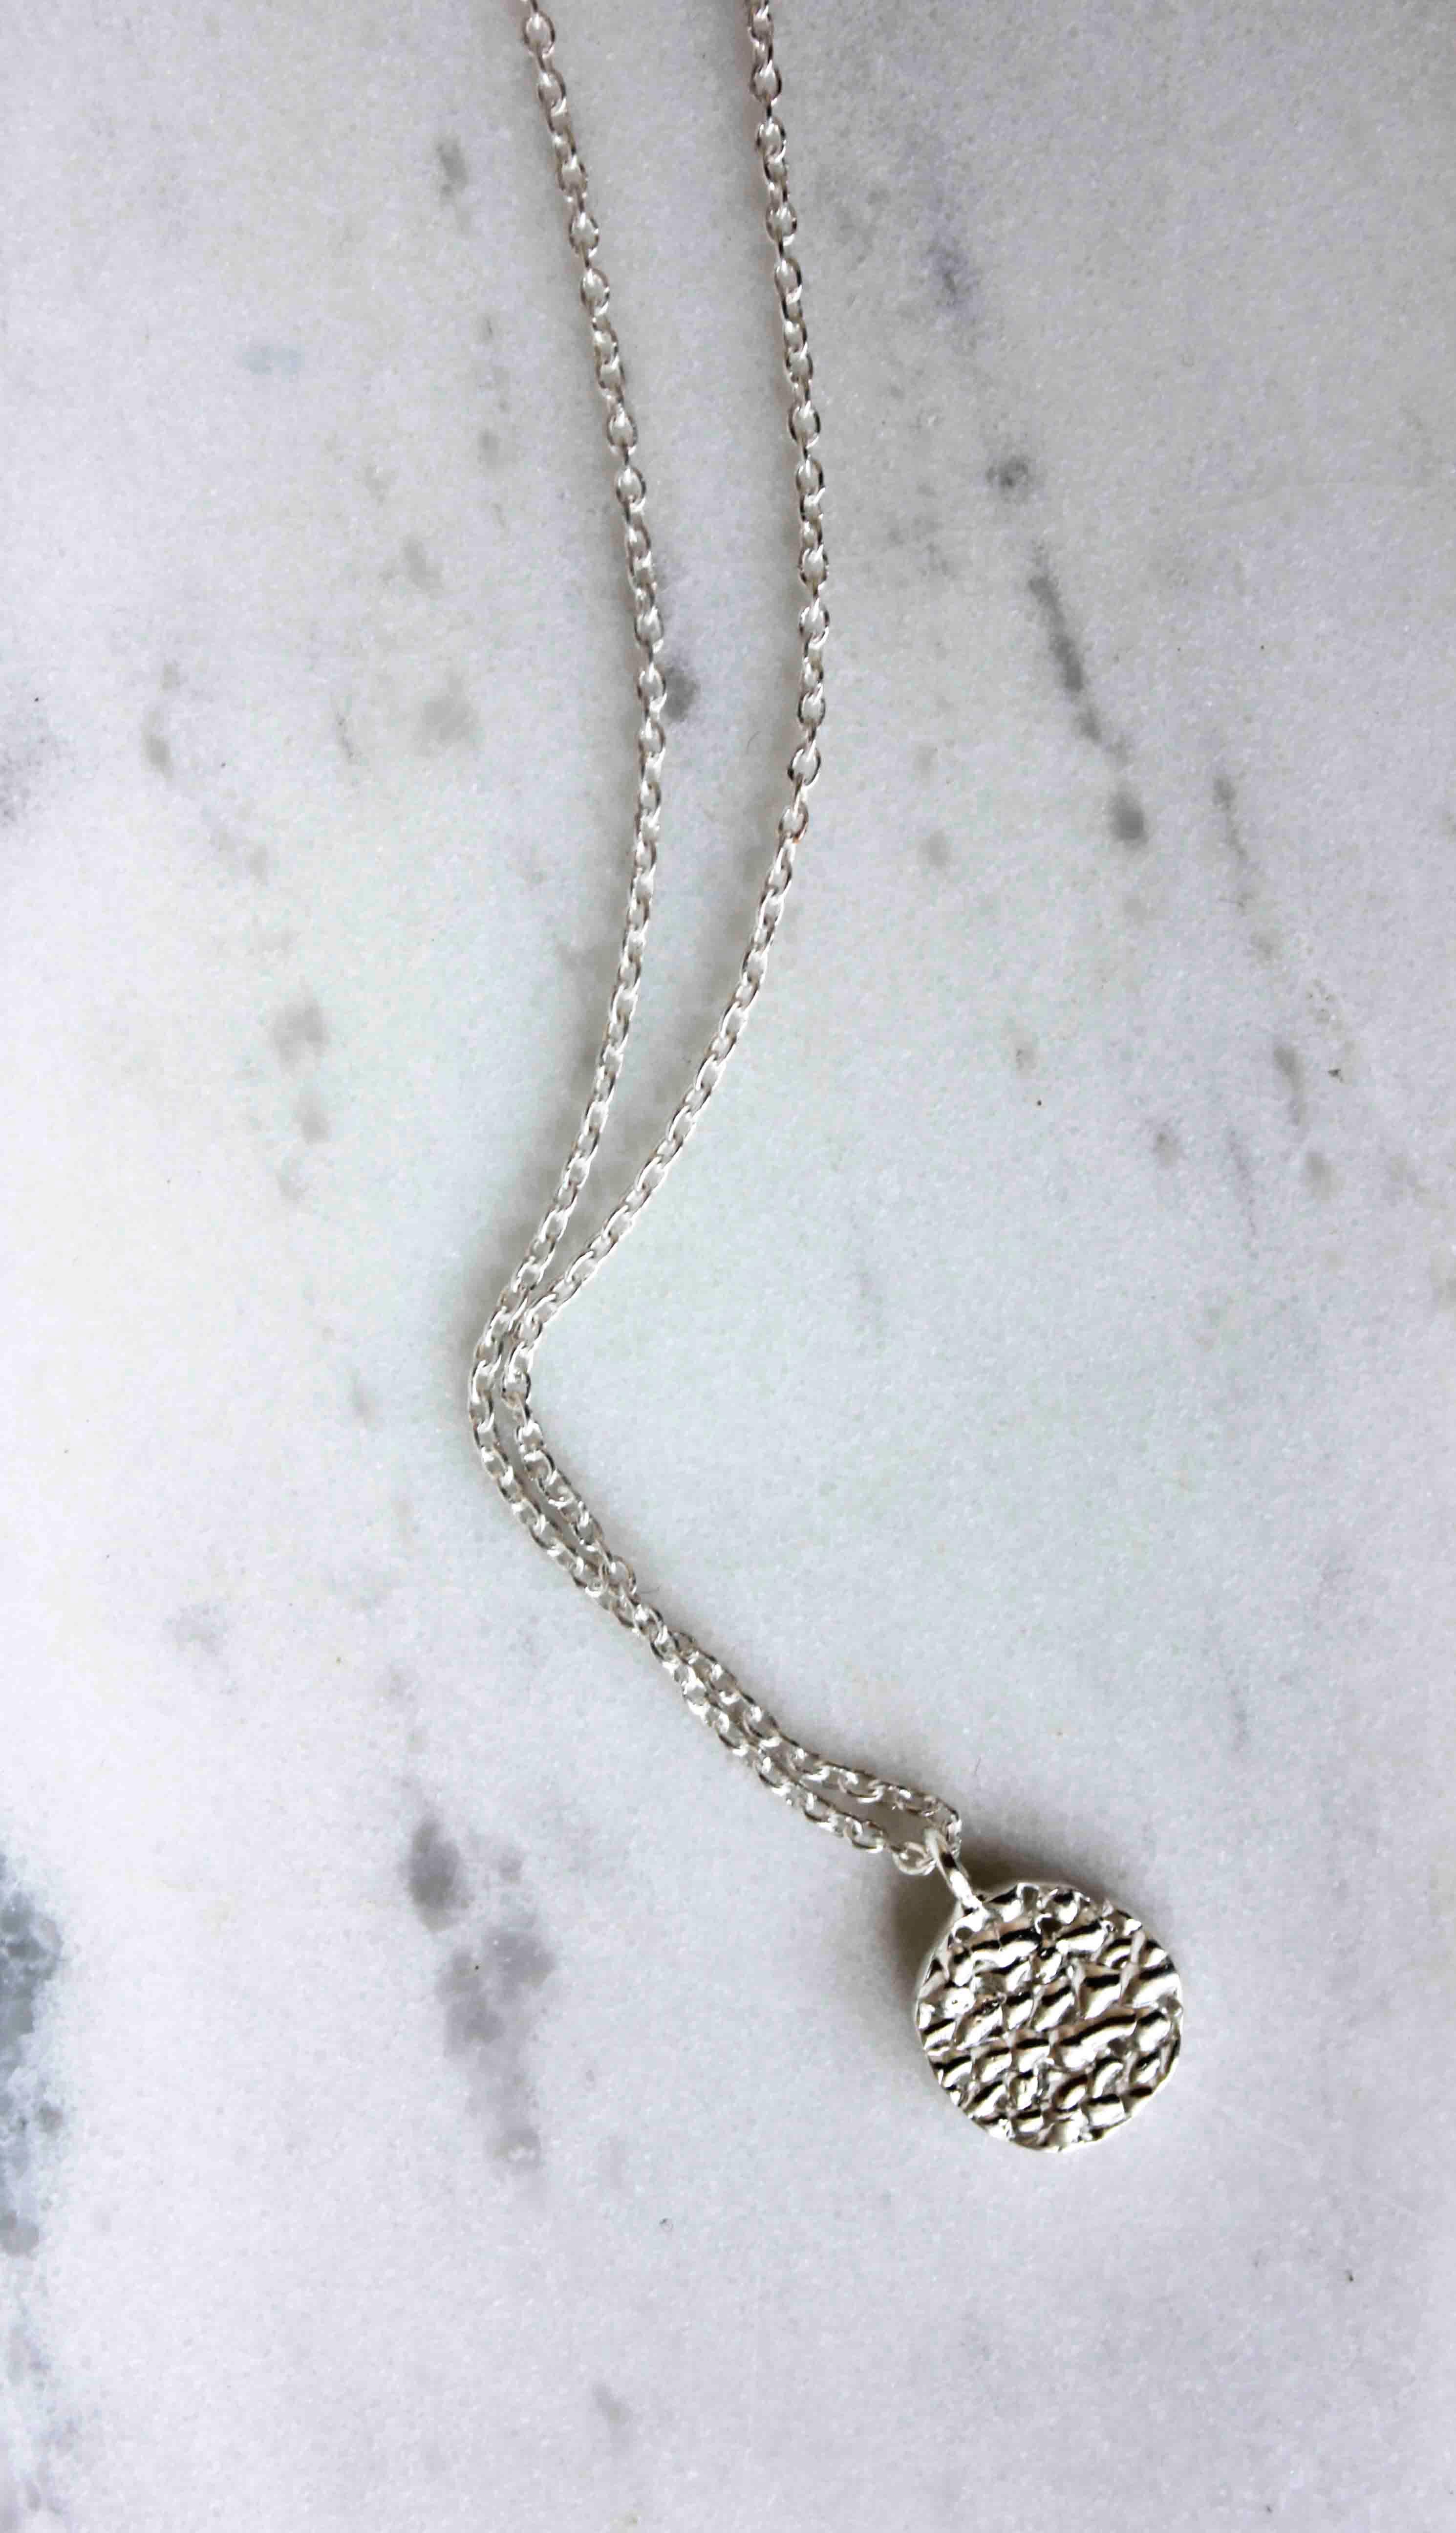 The Flakes Necklace is handcrafted from eco silver.

Is an everyday dainty necklace with an impressive texture, which strung on a 44cm chain.

The Flake Necklace can be worn alone or layered.

Diameter: 1.2 cm

Chain length: 44 cm